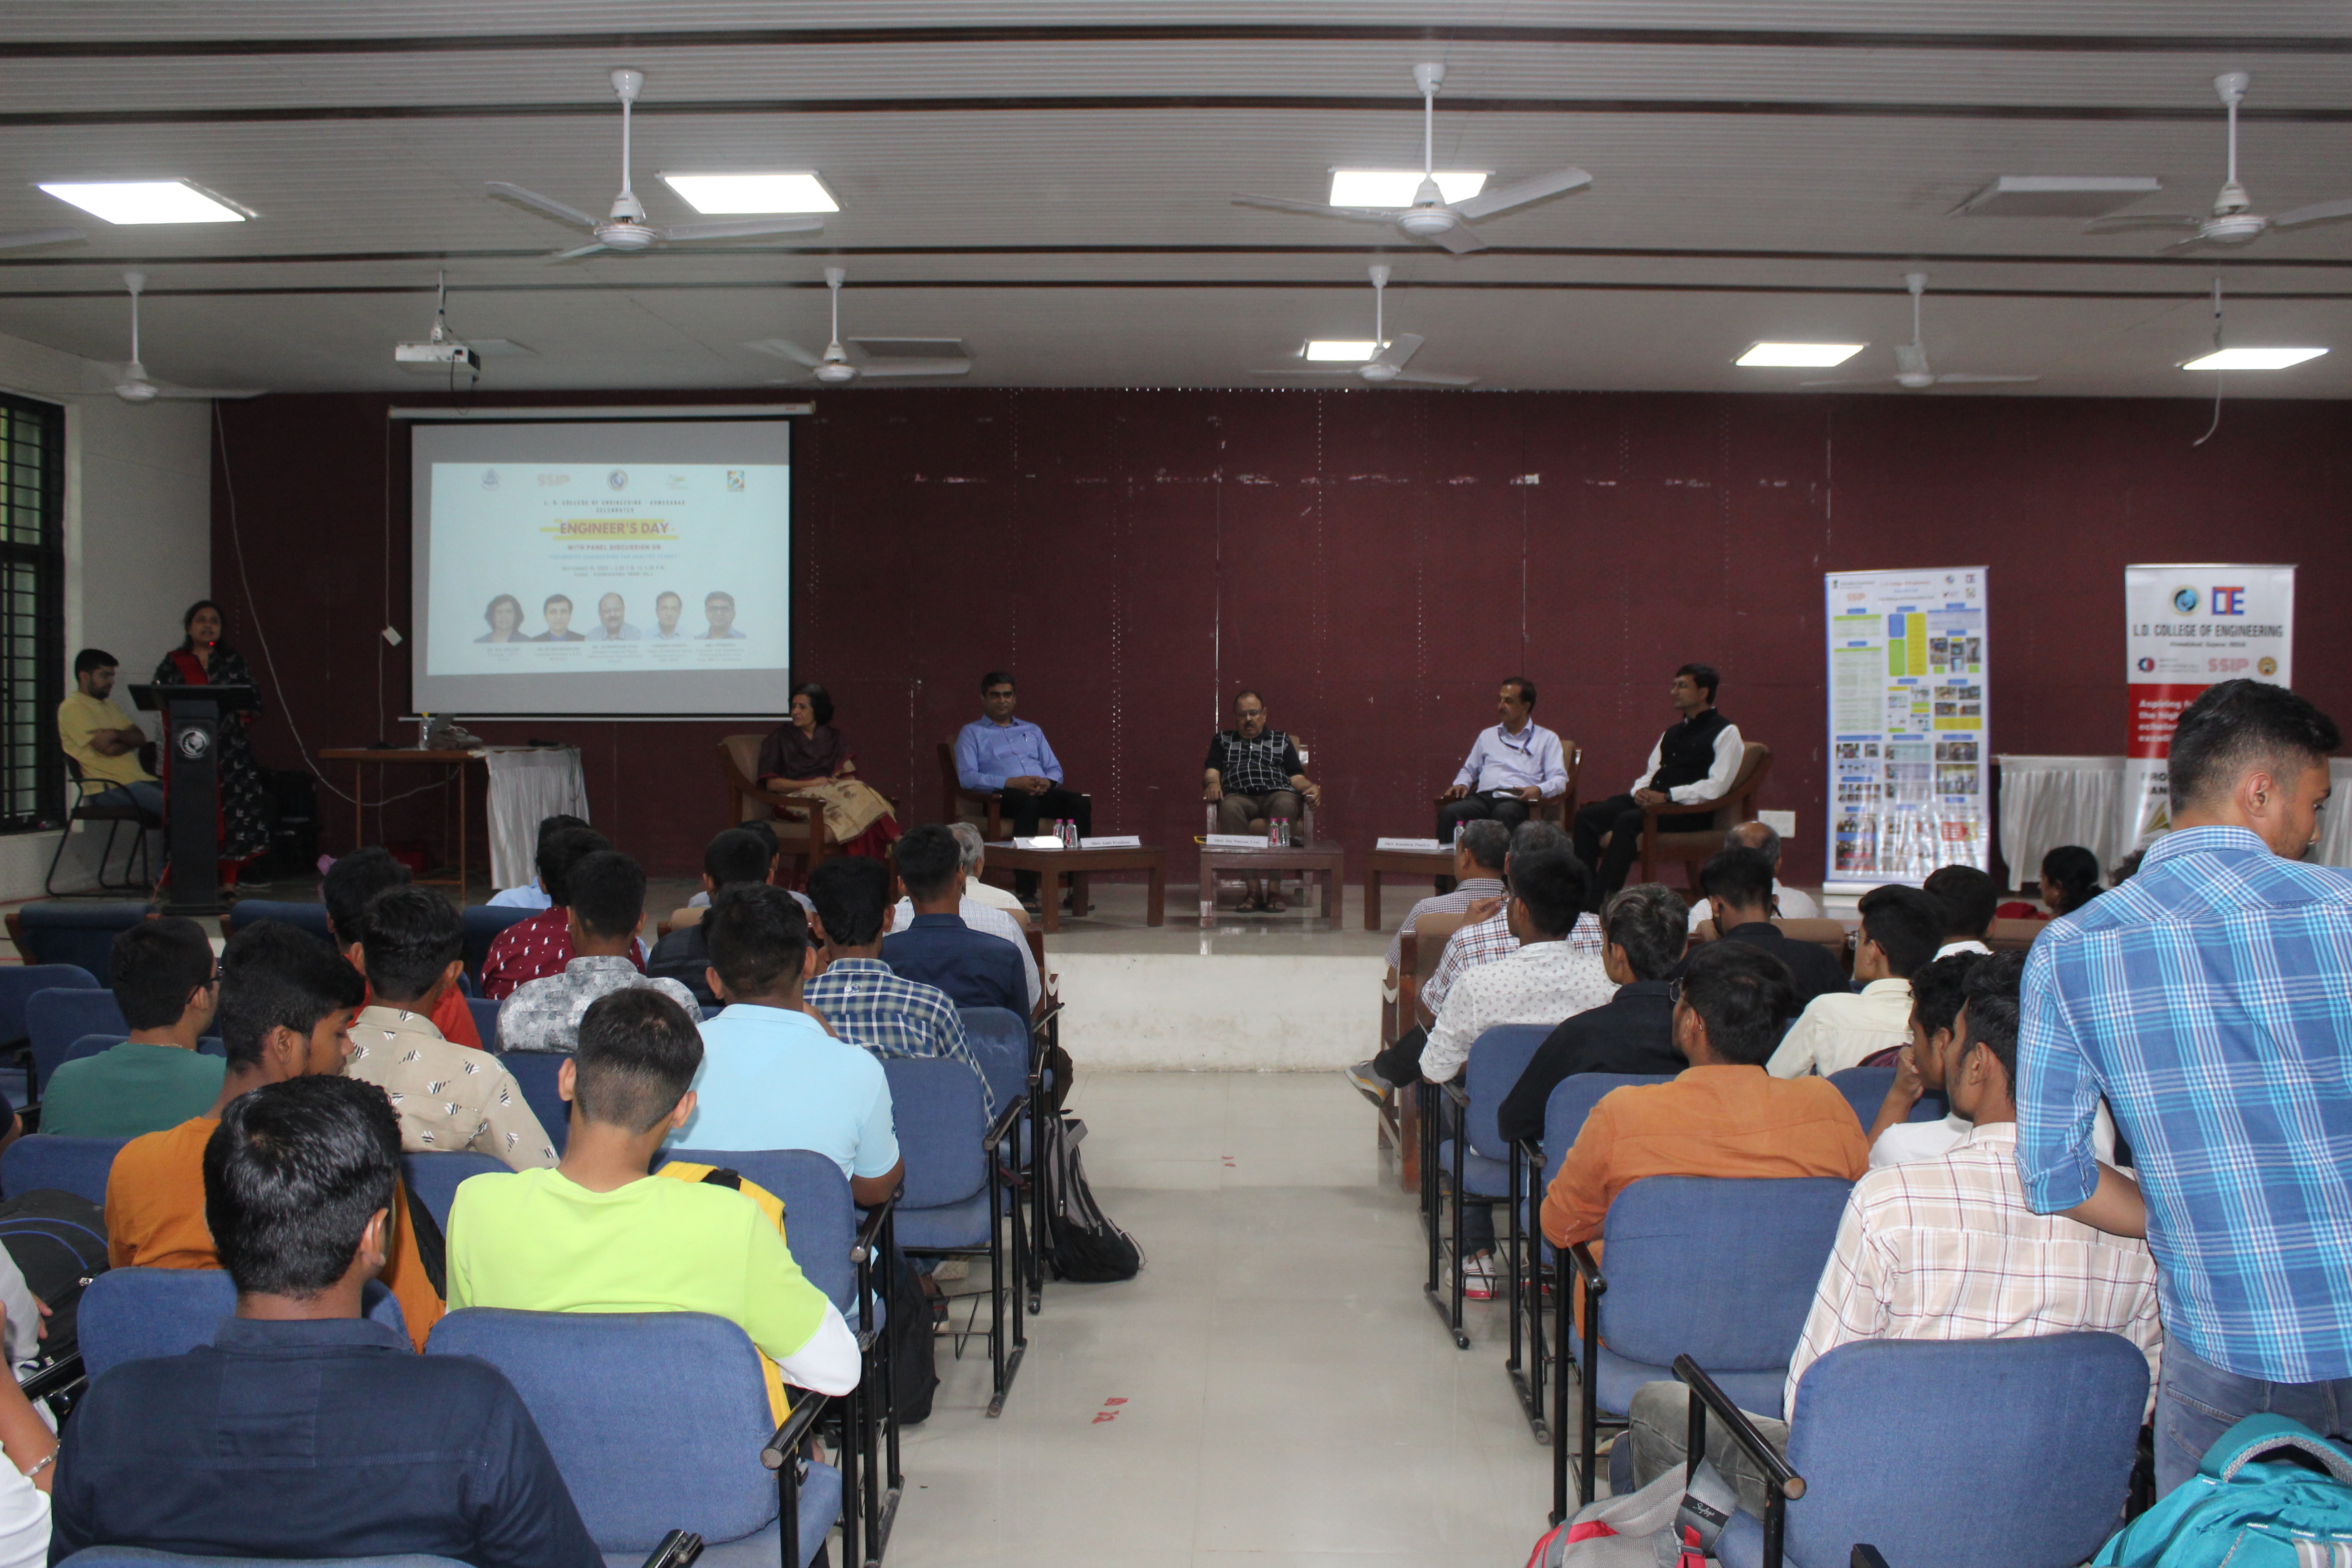 Panel discussion on “Futuristic Engineering for Healthy Planet" on Engineer’s Day-15th September,2022